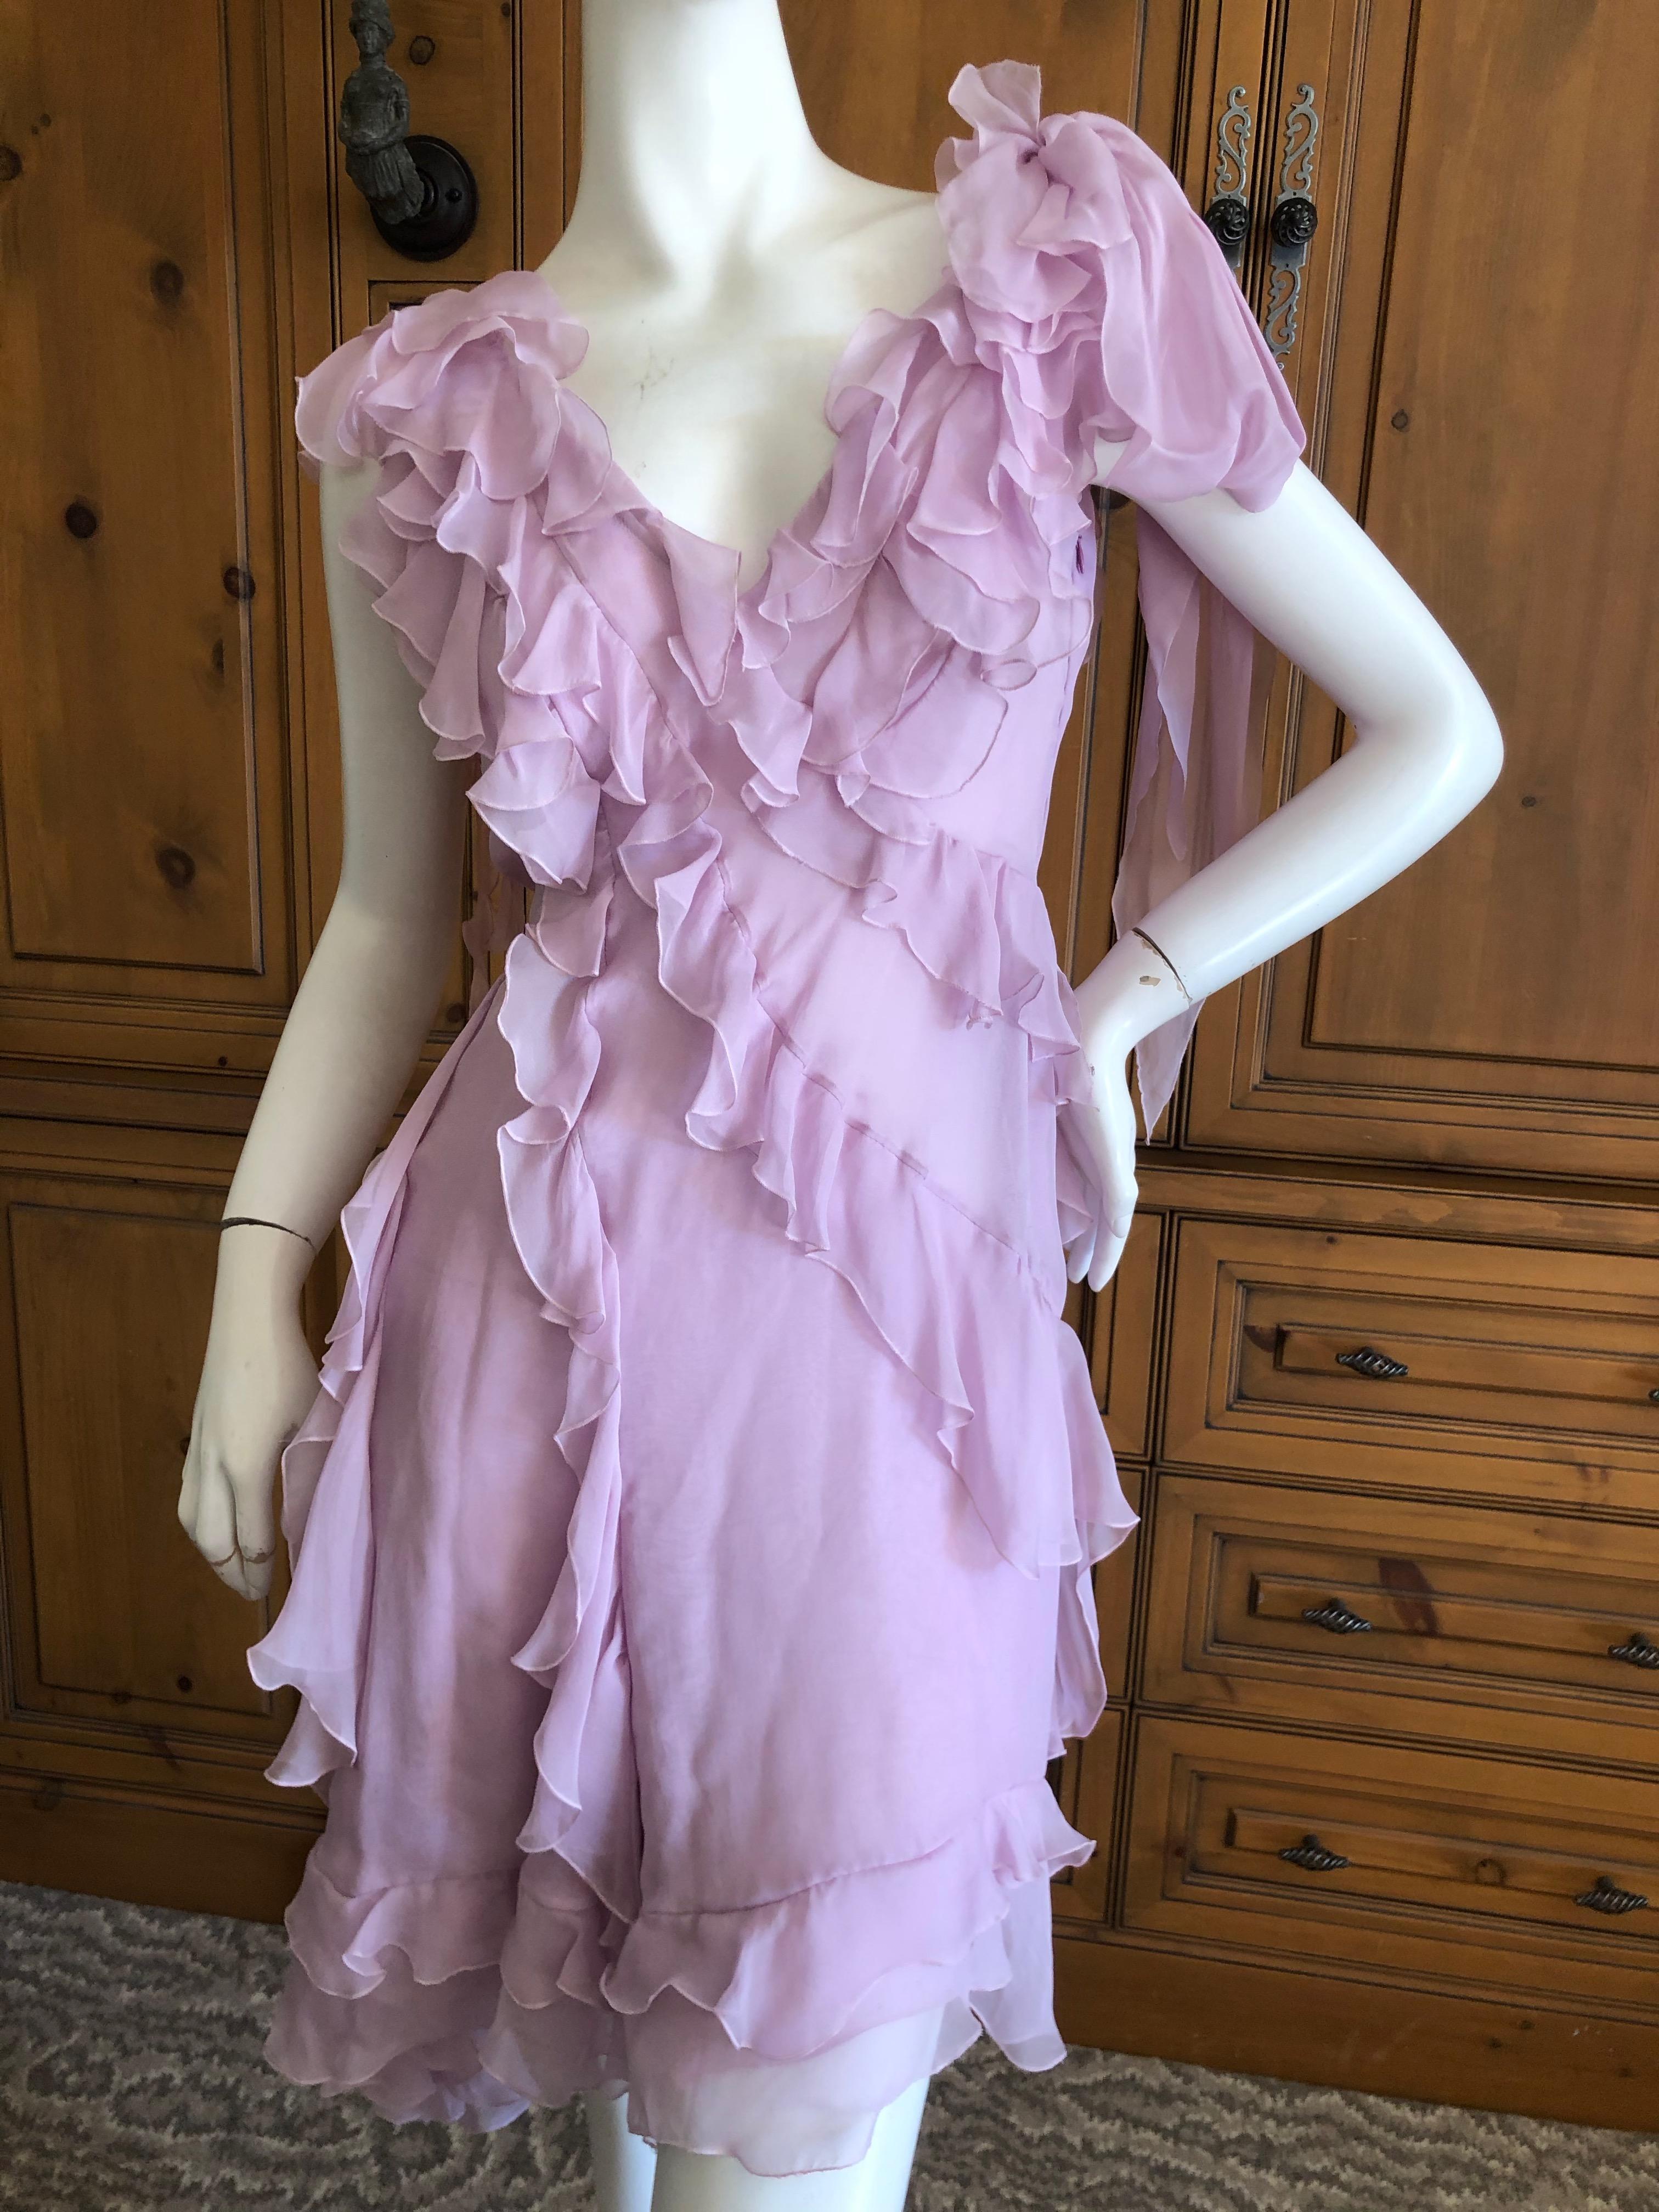 Versace Sweet Silk Chiffon Pink Ruffled Cocktail Dress from Spring 2004.
Donatella's strongest collection, this is so very pretty
Size 42
Bust 38